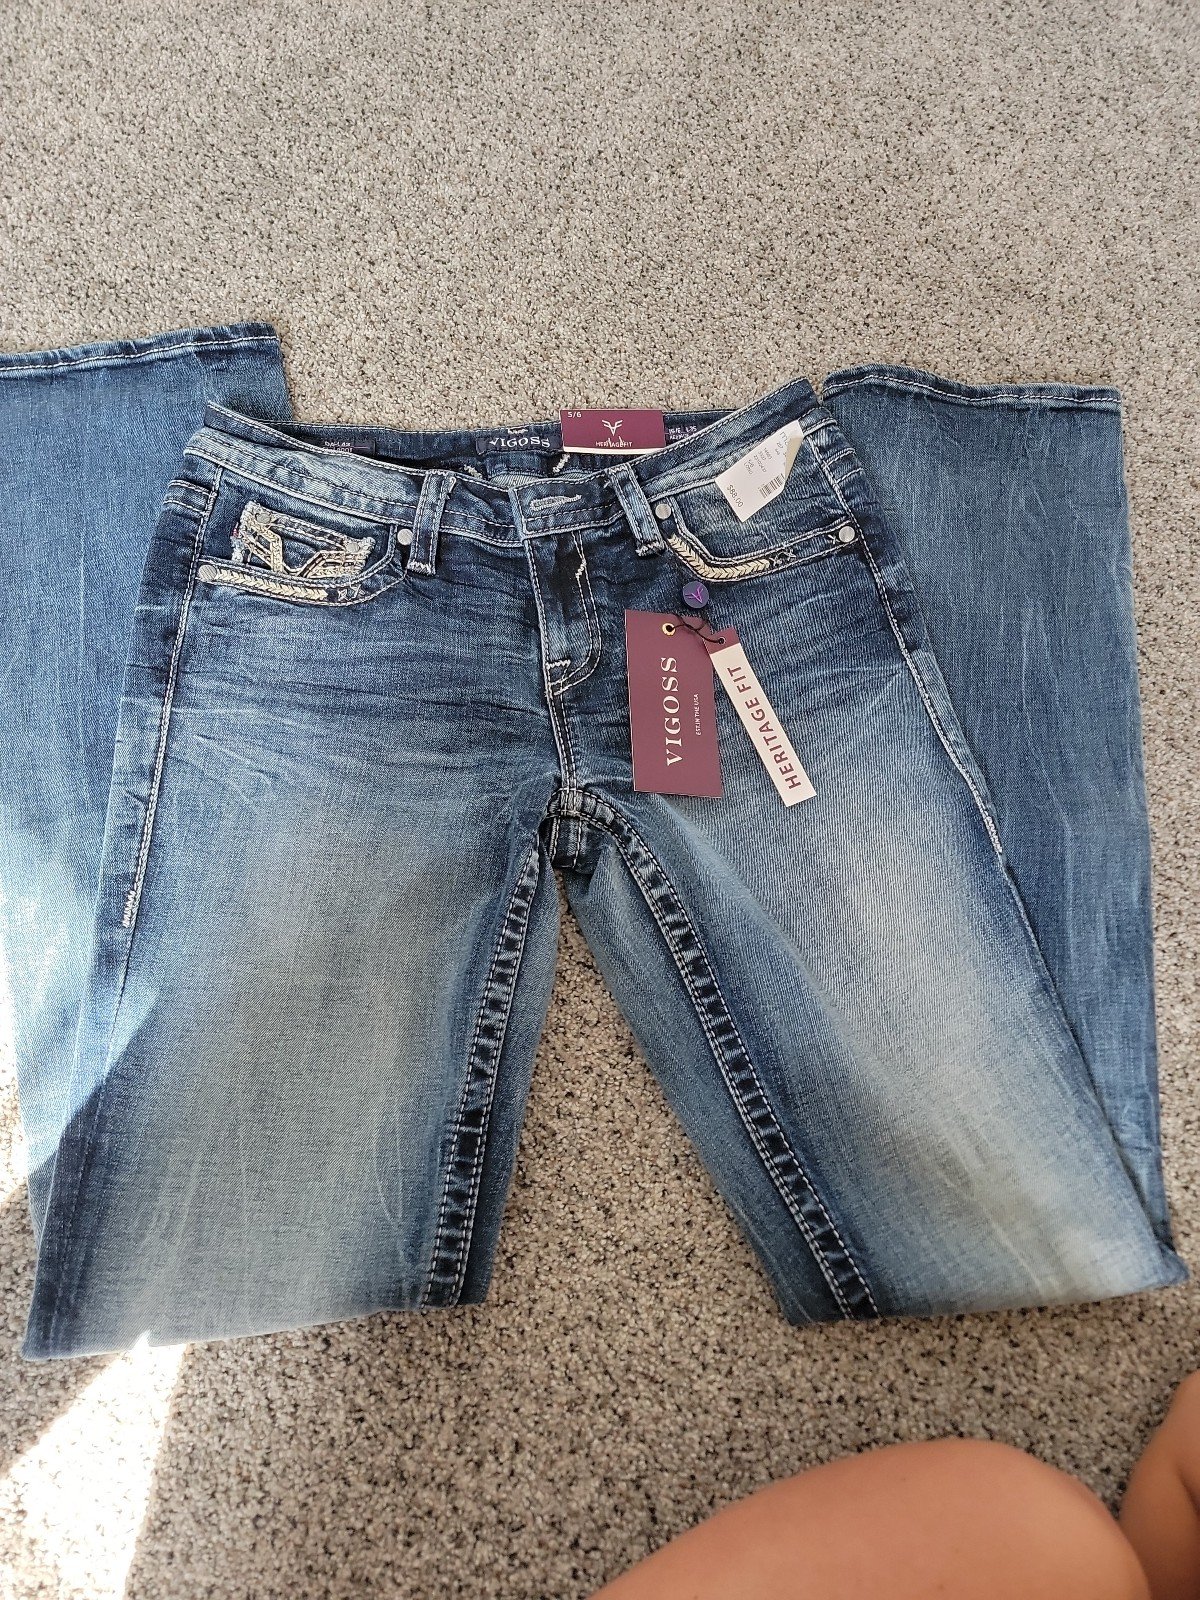 Affordable Vigoss NWT slim boot Jeans 5/6 35L or3kNu4Zf for sale